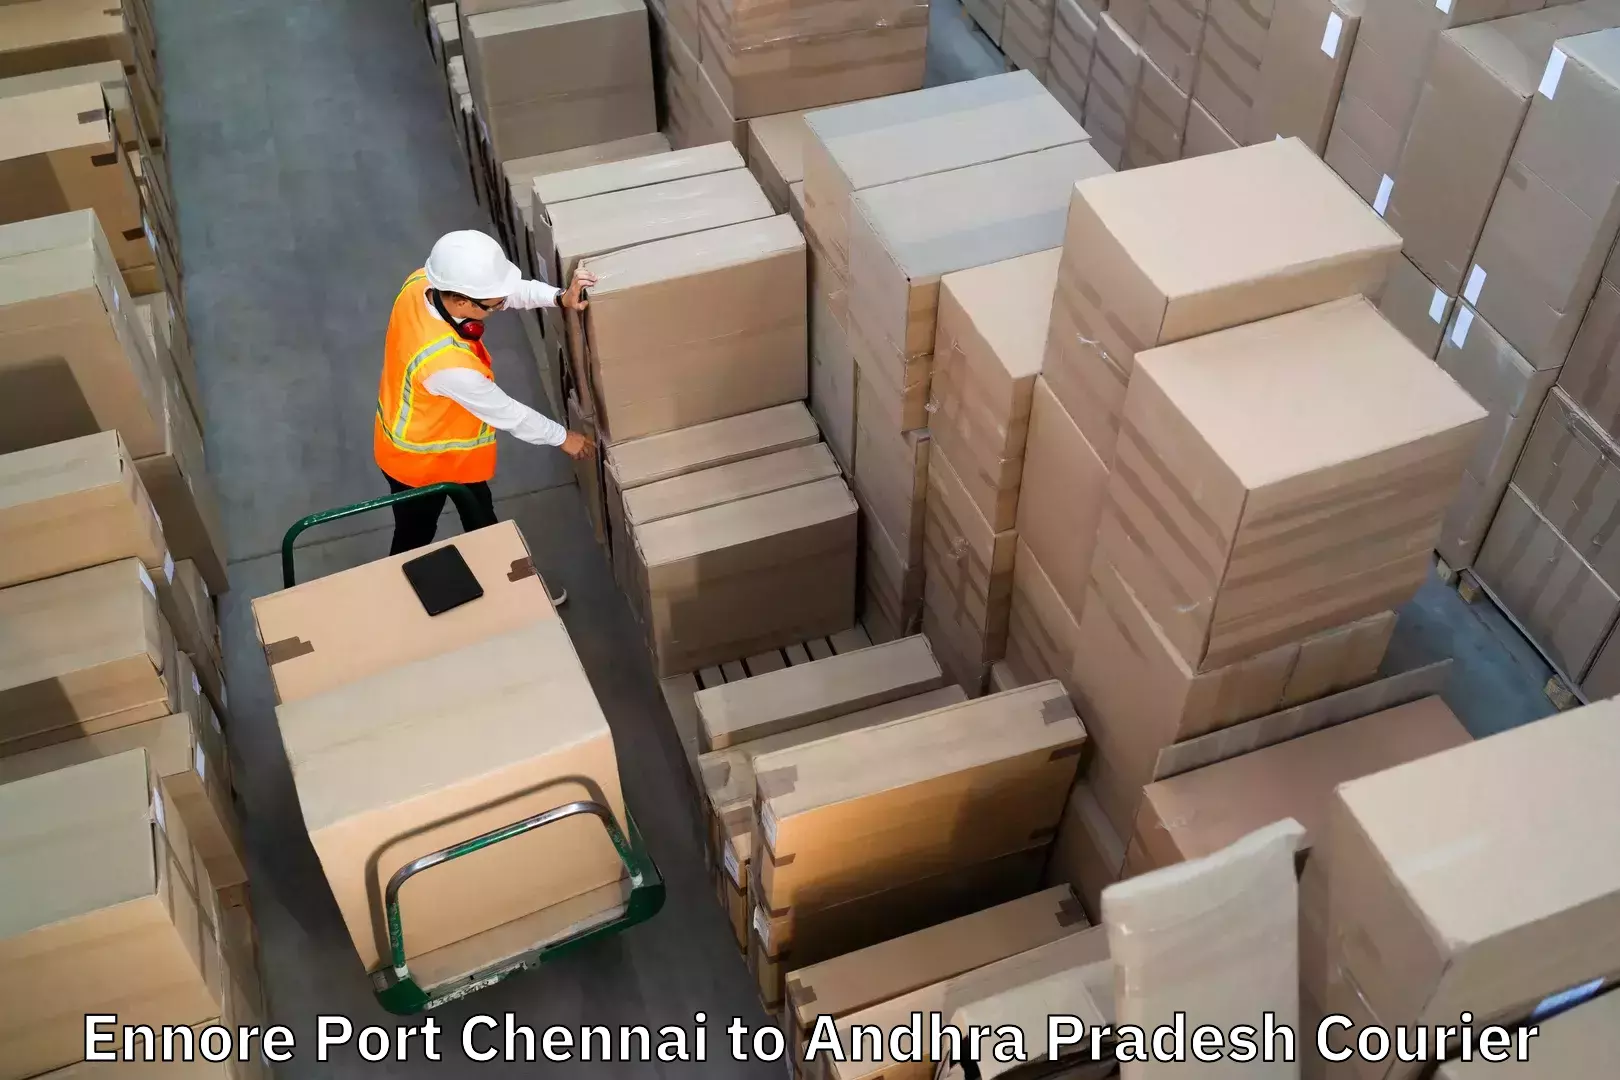 Scheduled baggage courier Ennore Port Chennai to Chintapalli